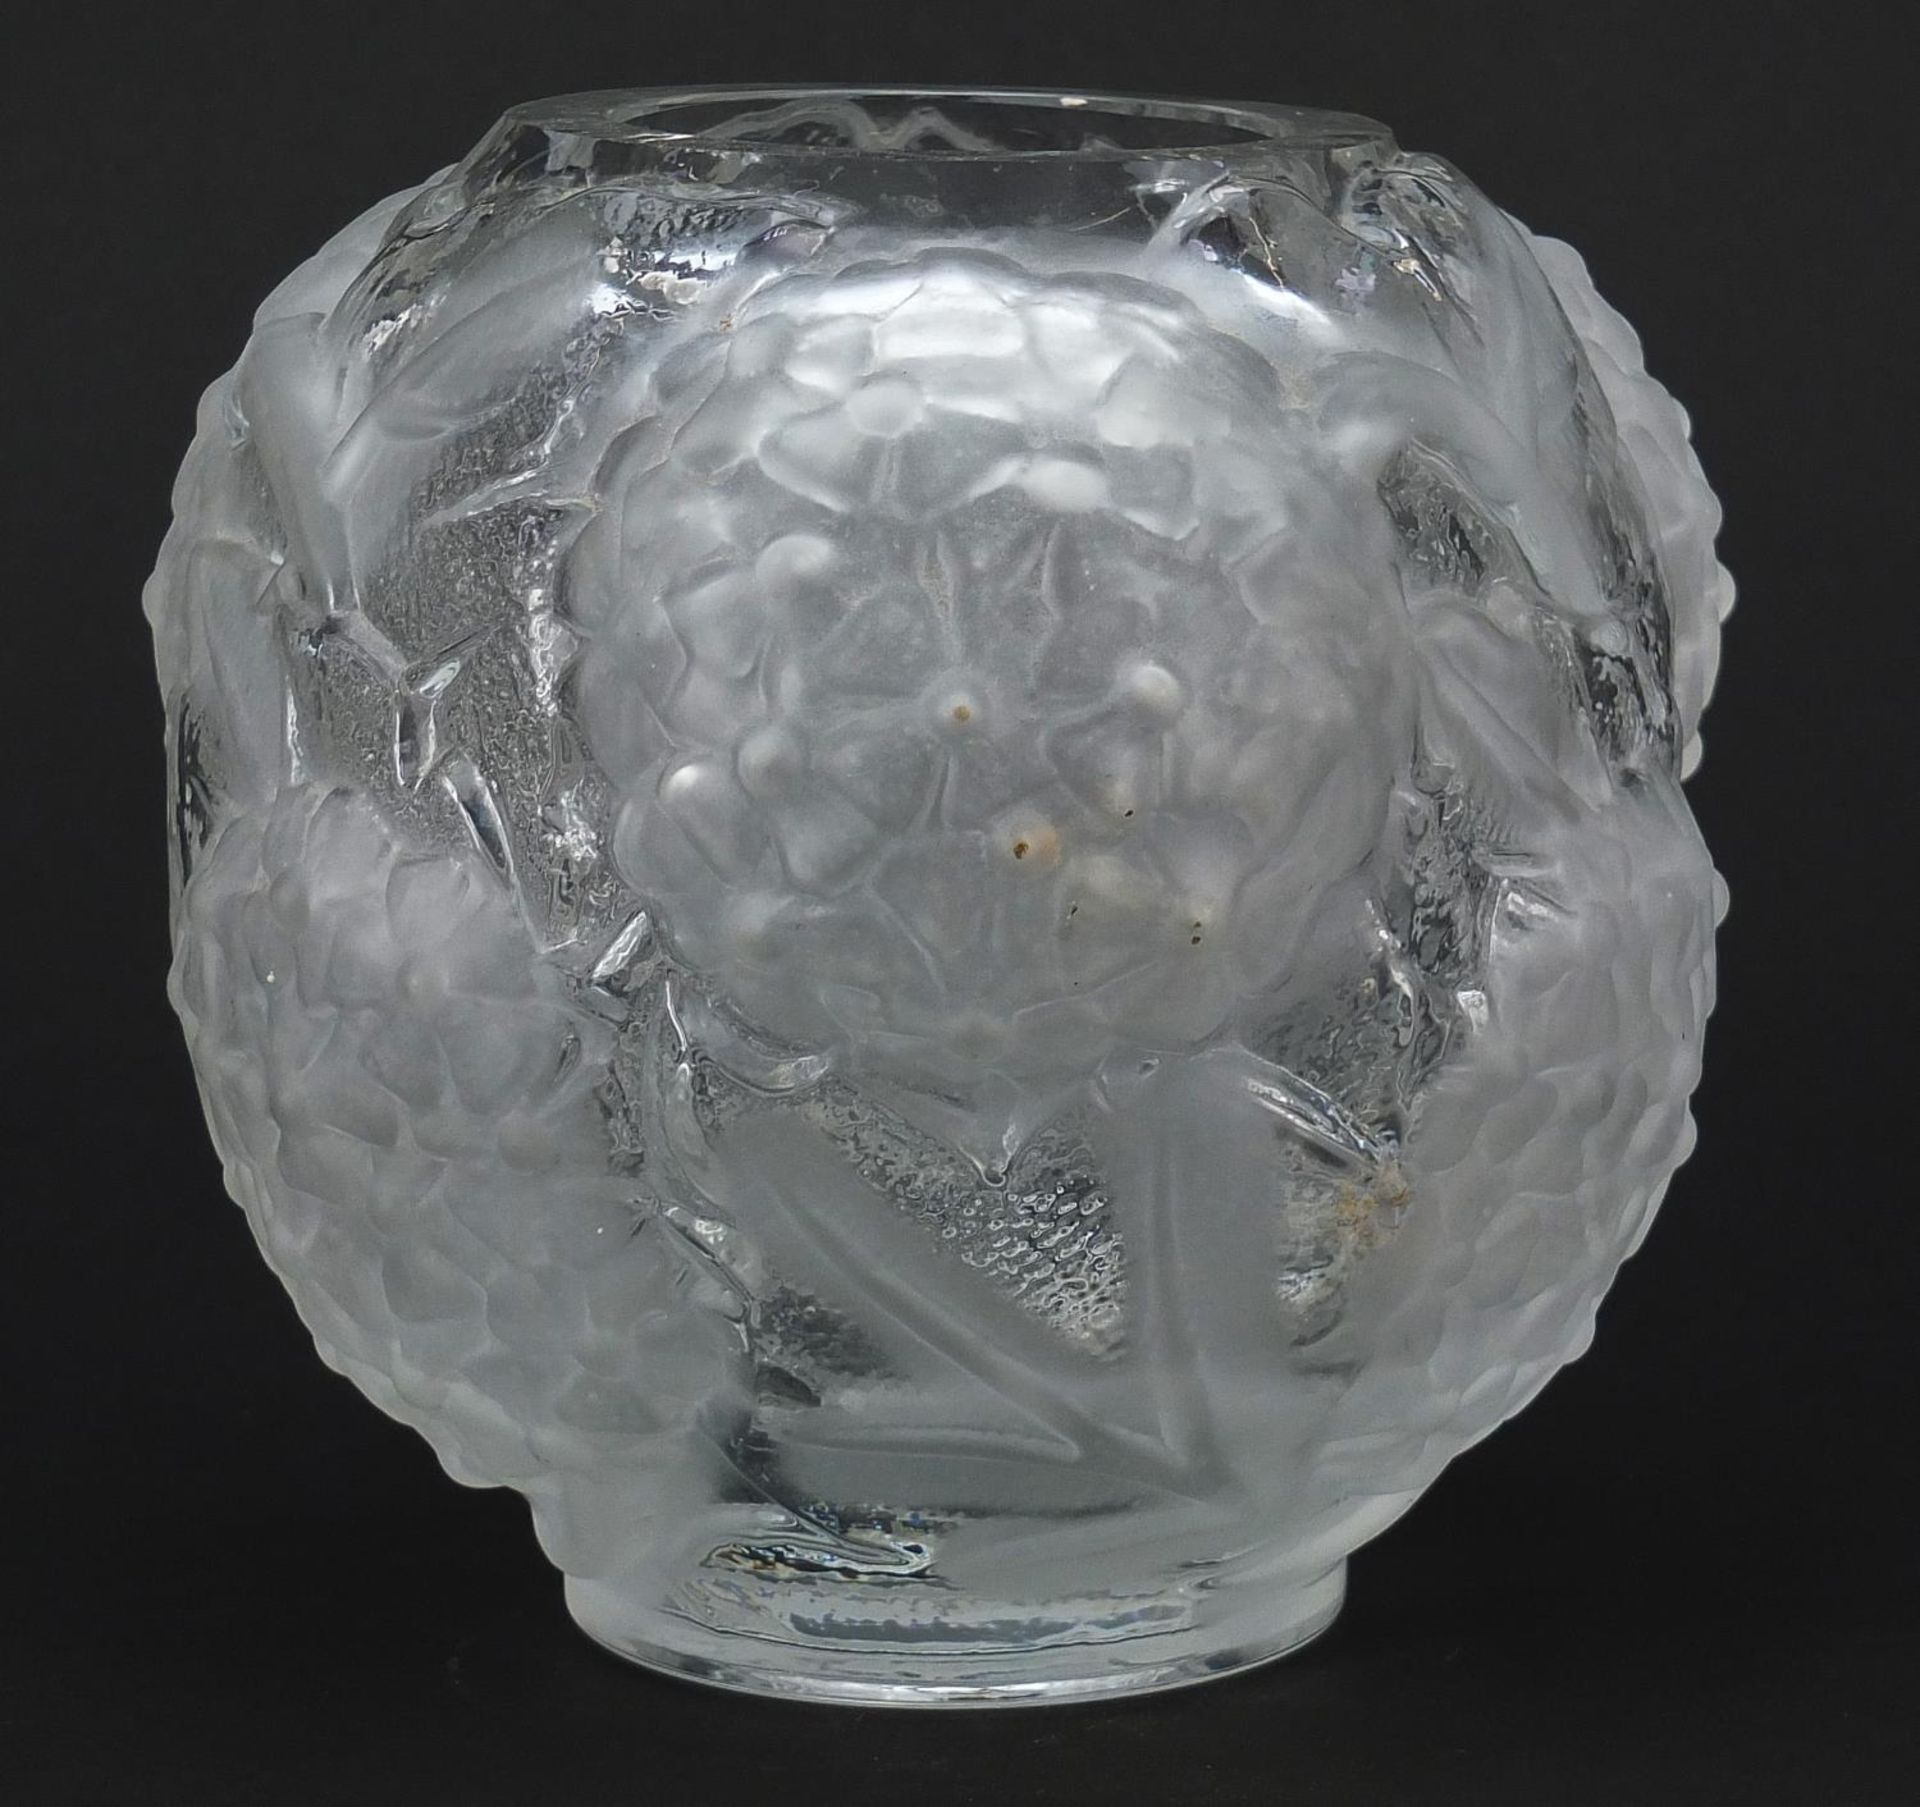 Lalique design frosted and clear glass vase, 16cm high - Image 2 of 4